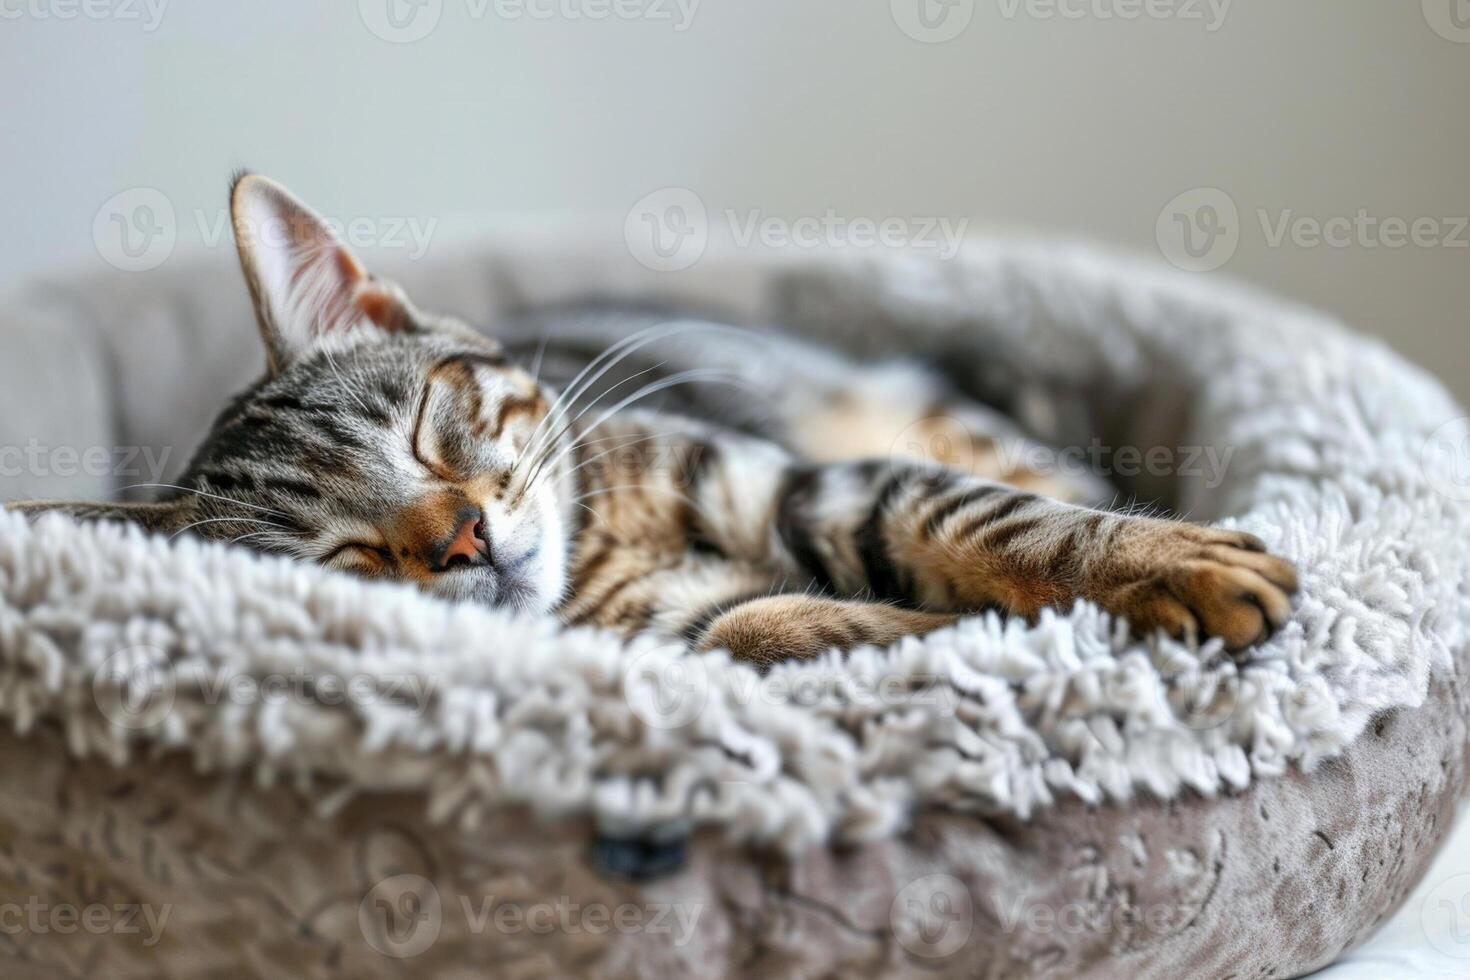 Fluffy cat sleeping curled up in a cozy bed, peaceful and content on International Cat Day photo